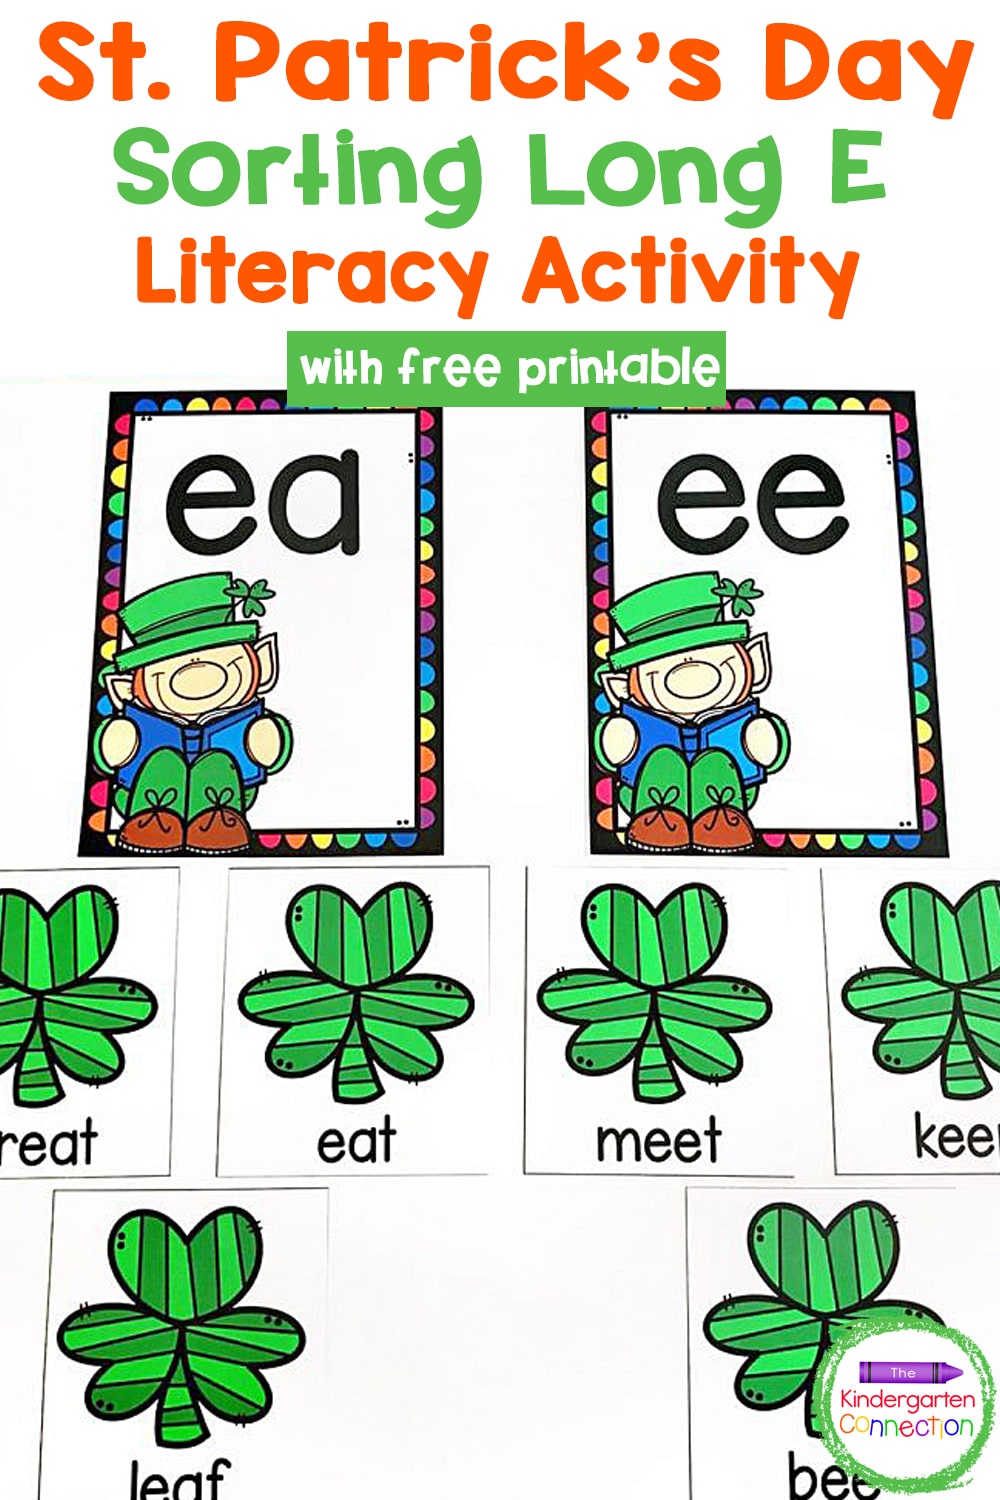 Grab our FREE Printable St. Patrick's Day Sorting Long E Activity for your Kindergarten literacy center! With many ways to play this activity will be a hit!